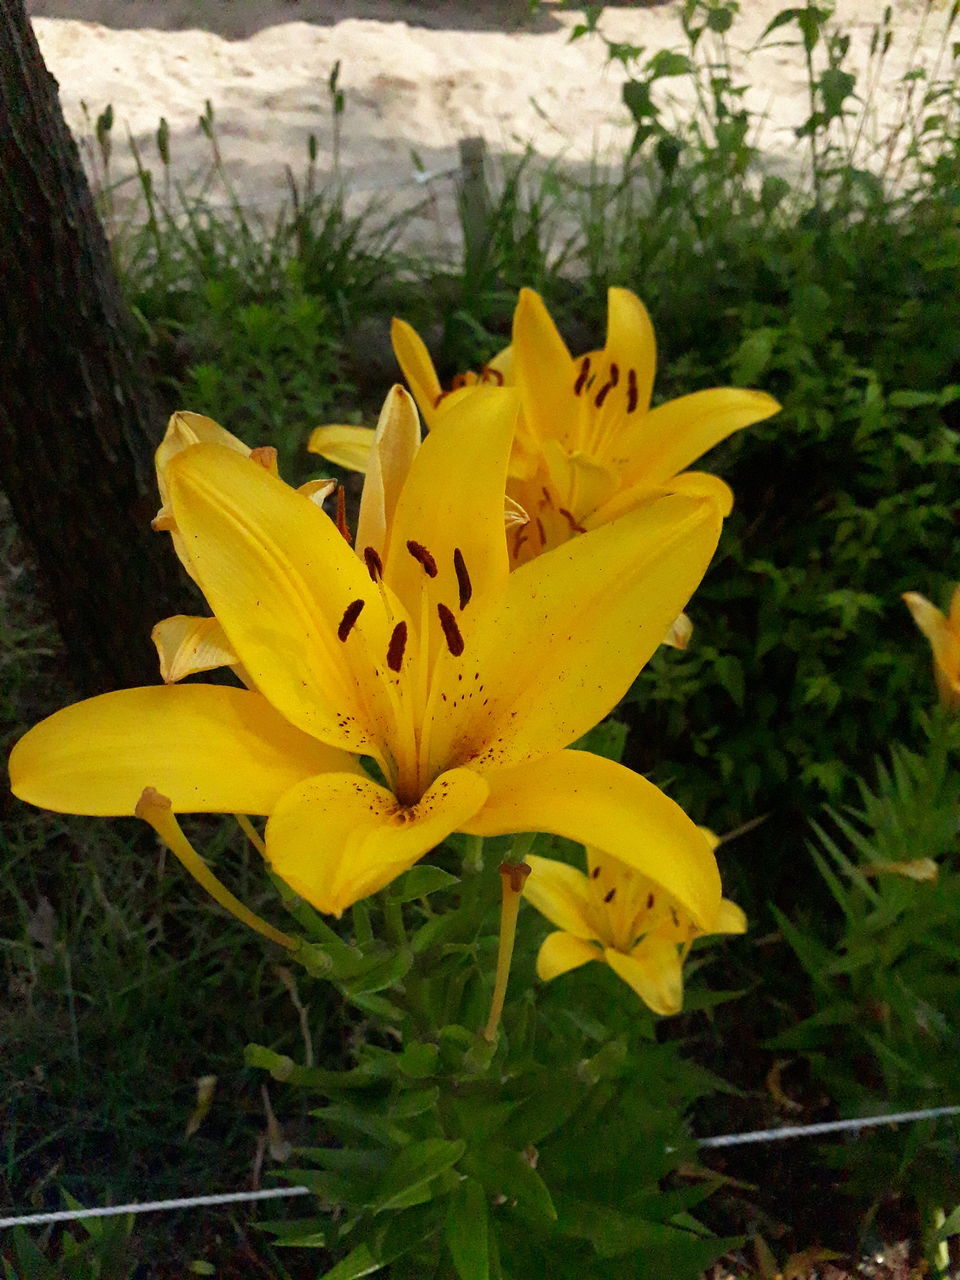 yellow, plant, flower, flowering plant, beauty in nature, freshness, growth, flower head, fragility, nature, petal, lily, inflorescence, close-up, daylily, no people, leaf, outdoors, day, botany, springtime, wildflower, blossom, focus on foreground